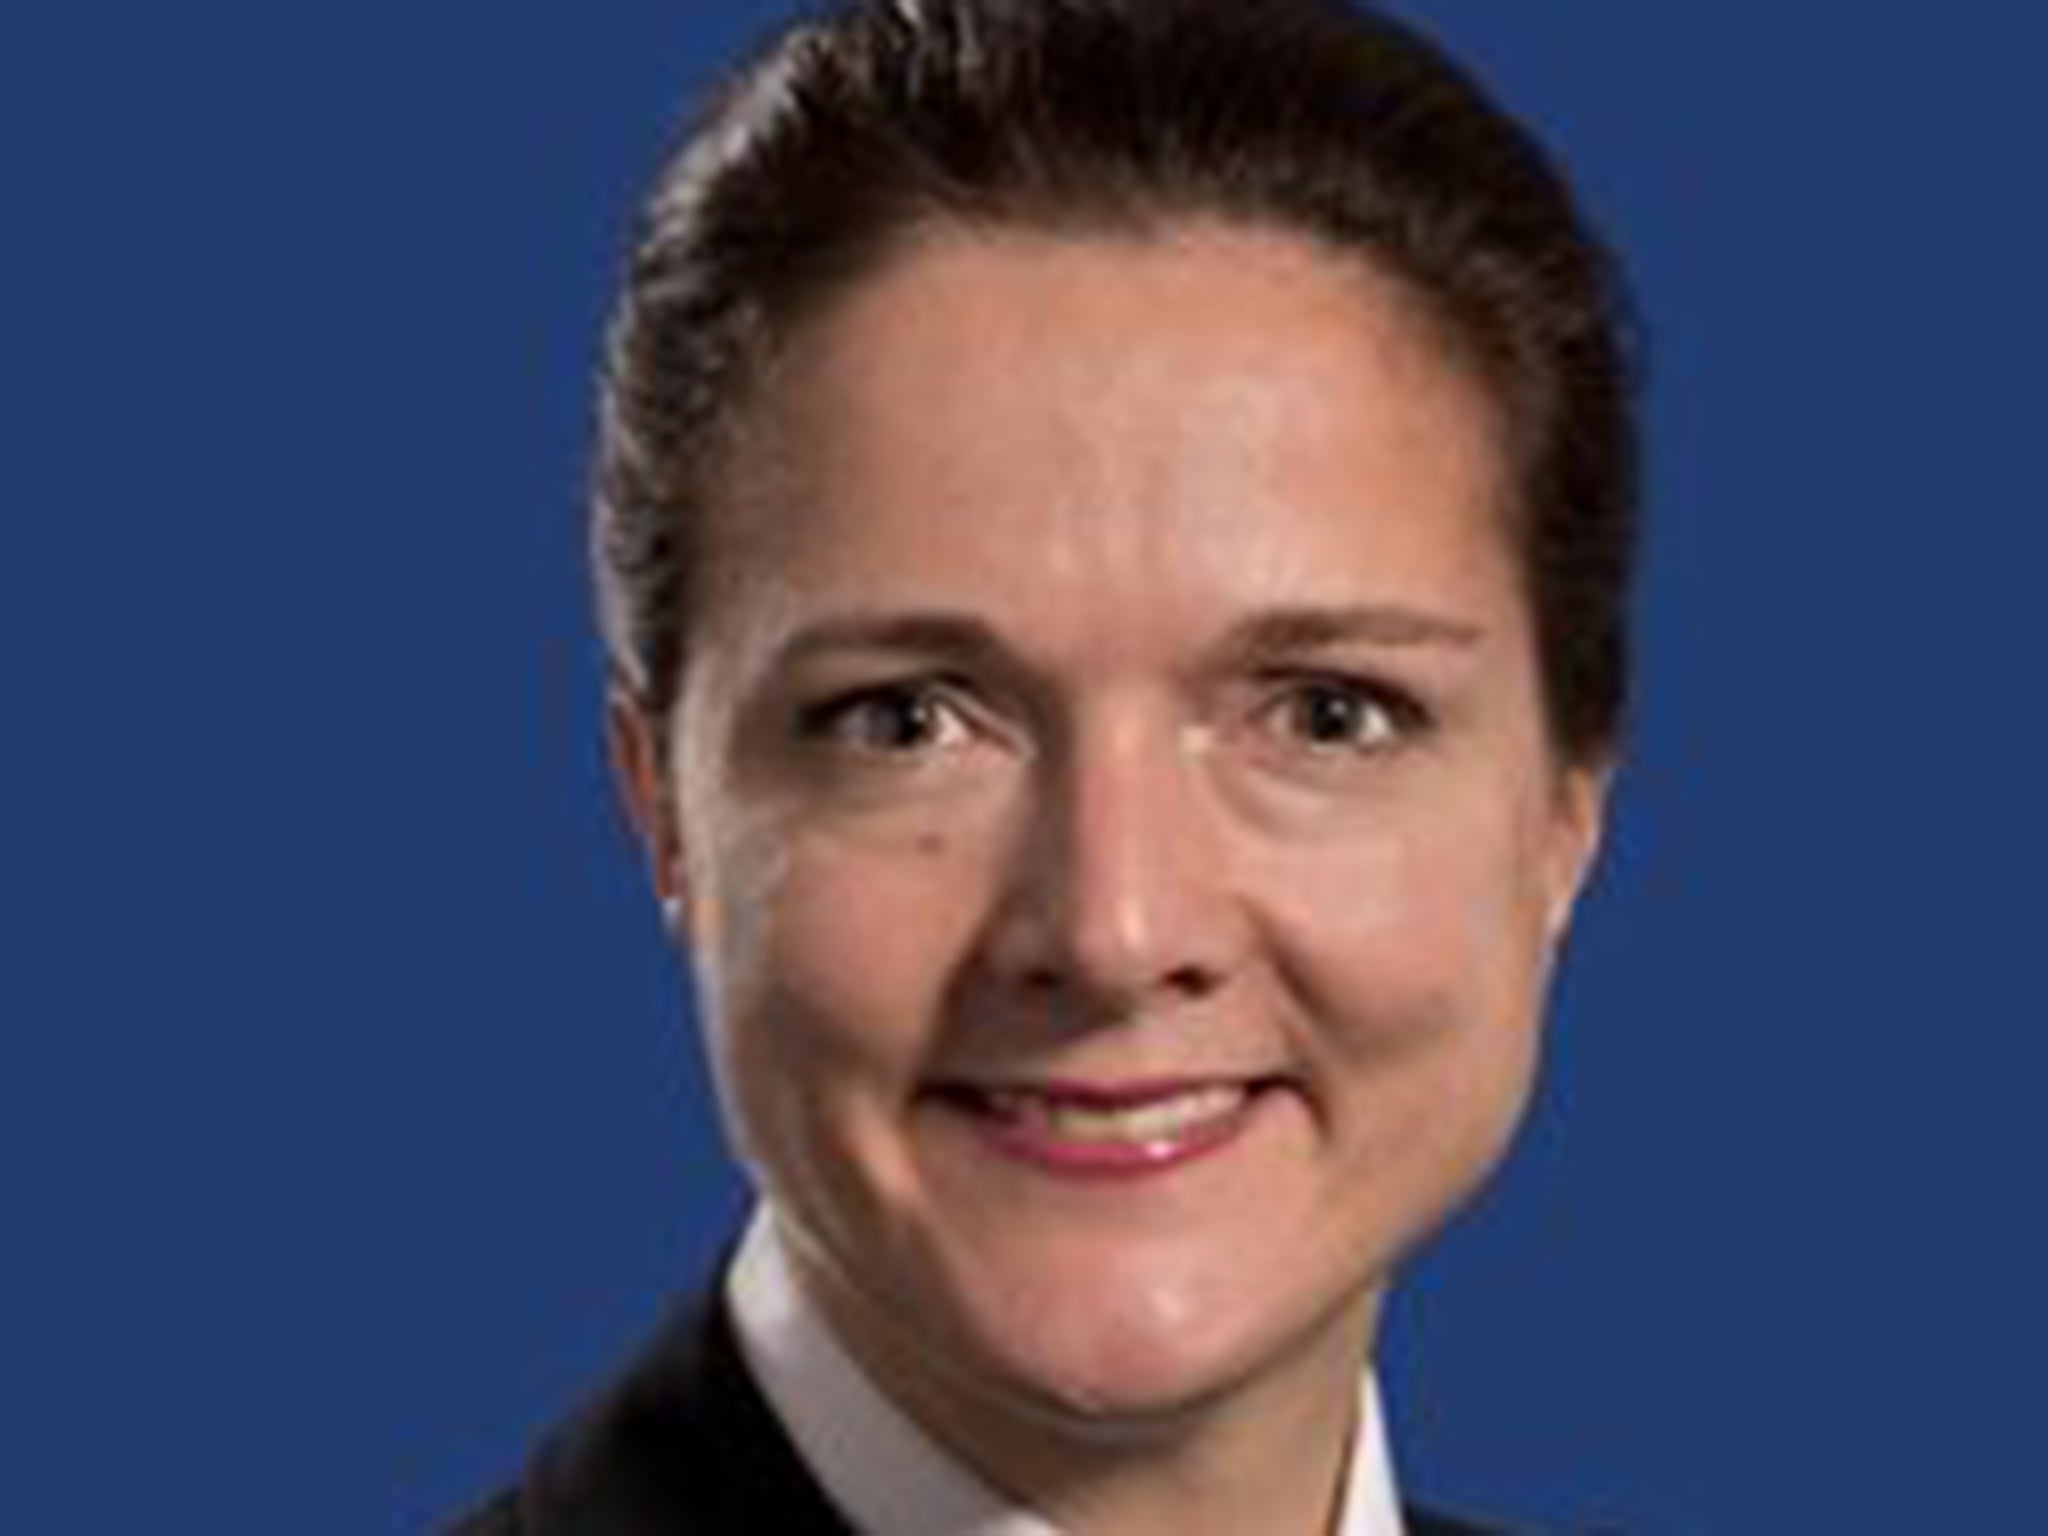 Rebekah Sutcliffe, Assistant Chief Constable, Greater Manchester Police